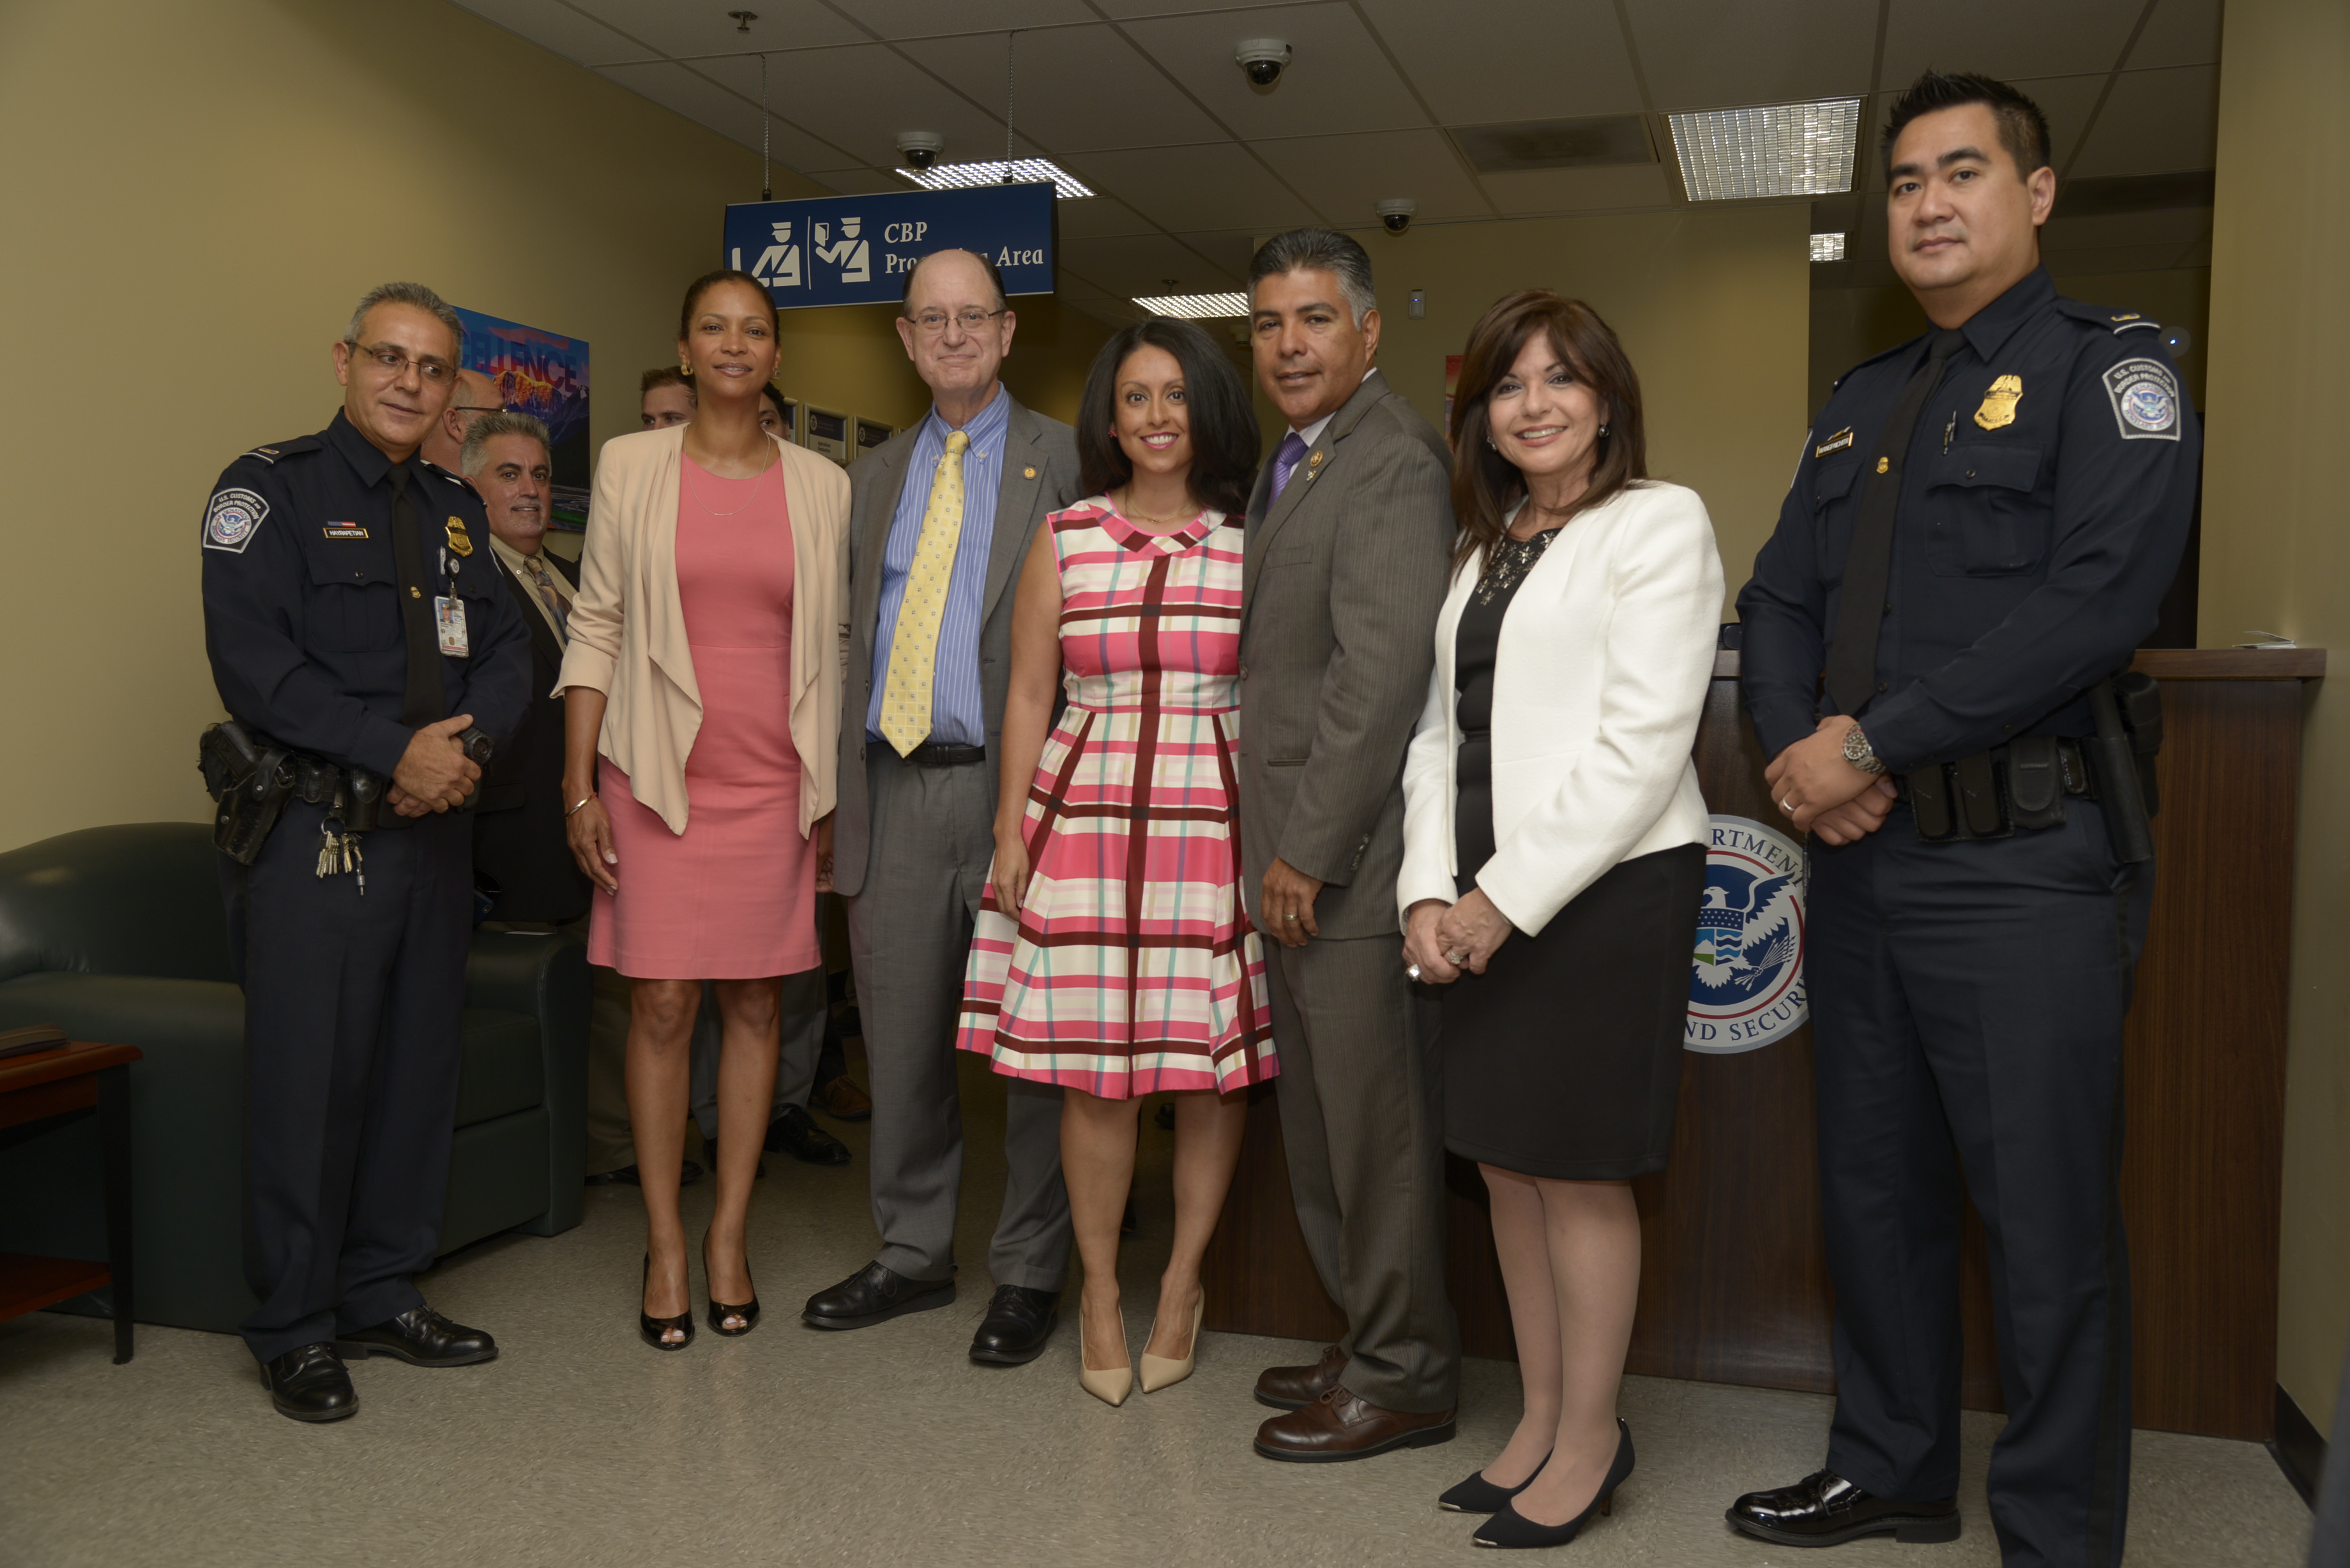 New US Customs and Border Protection grand opening at Van Nuys Airport